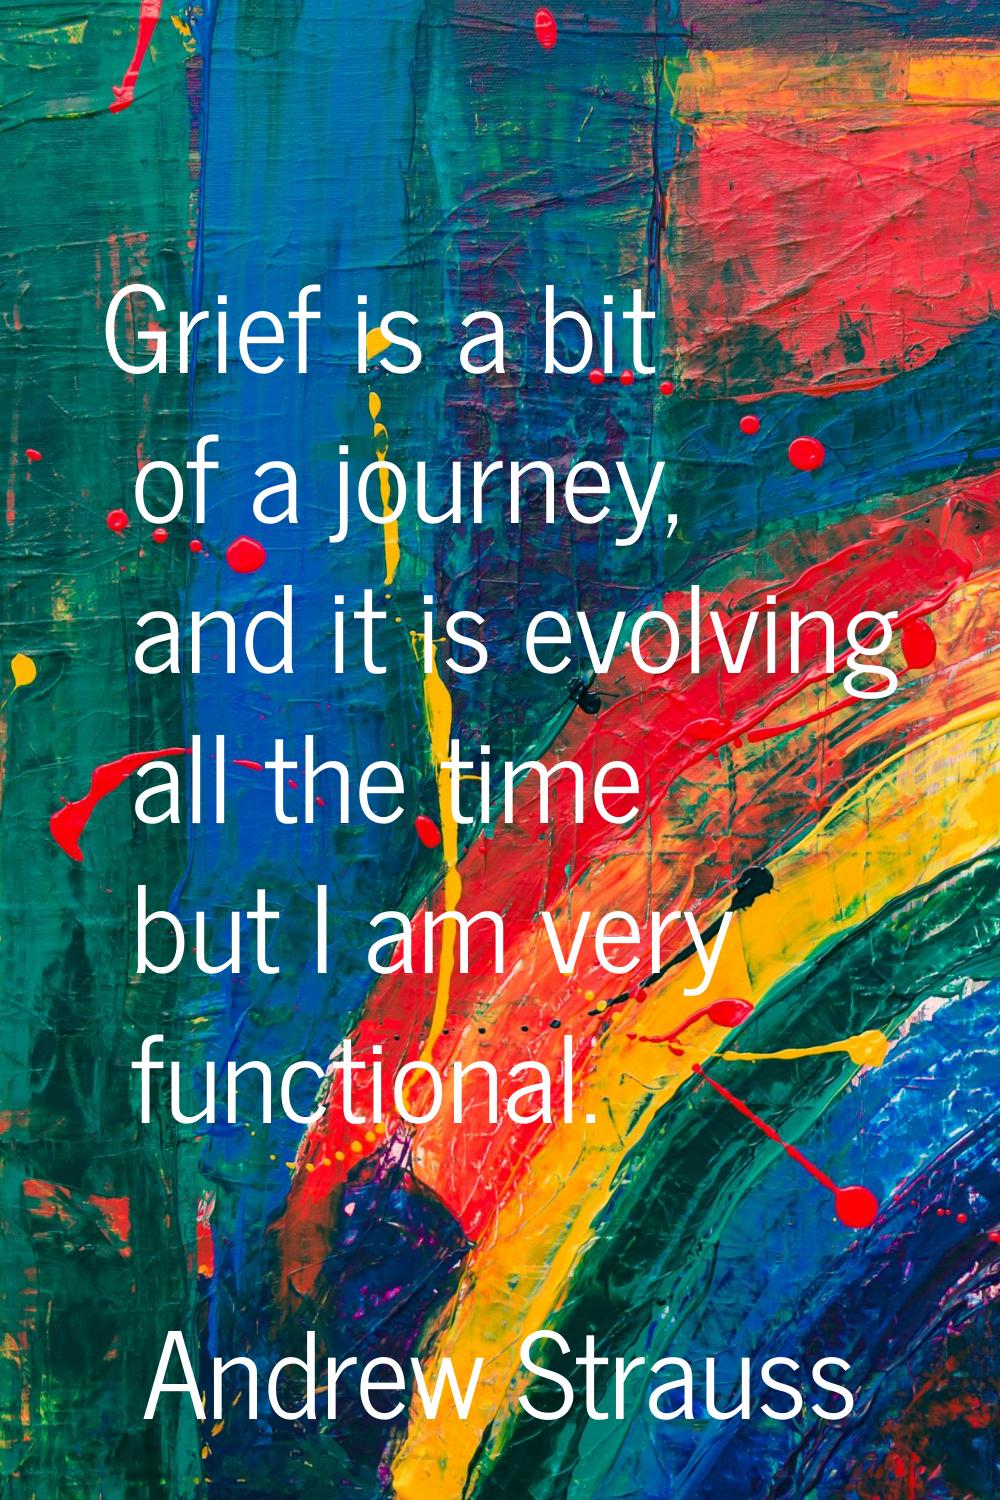 Grief is a bit of a journey, and it is evolving all the time but I am very functional.